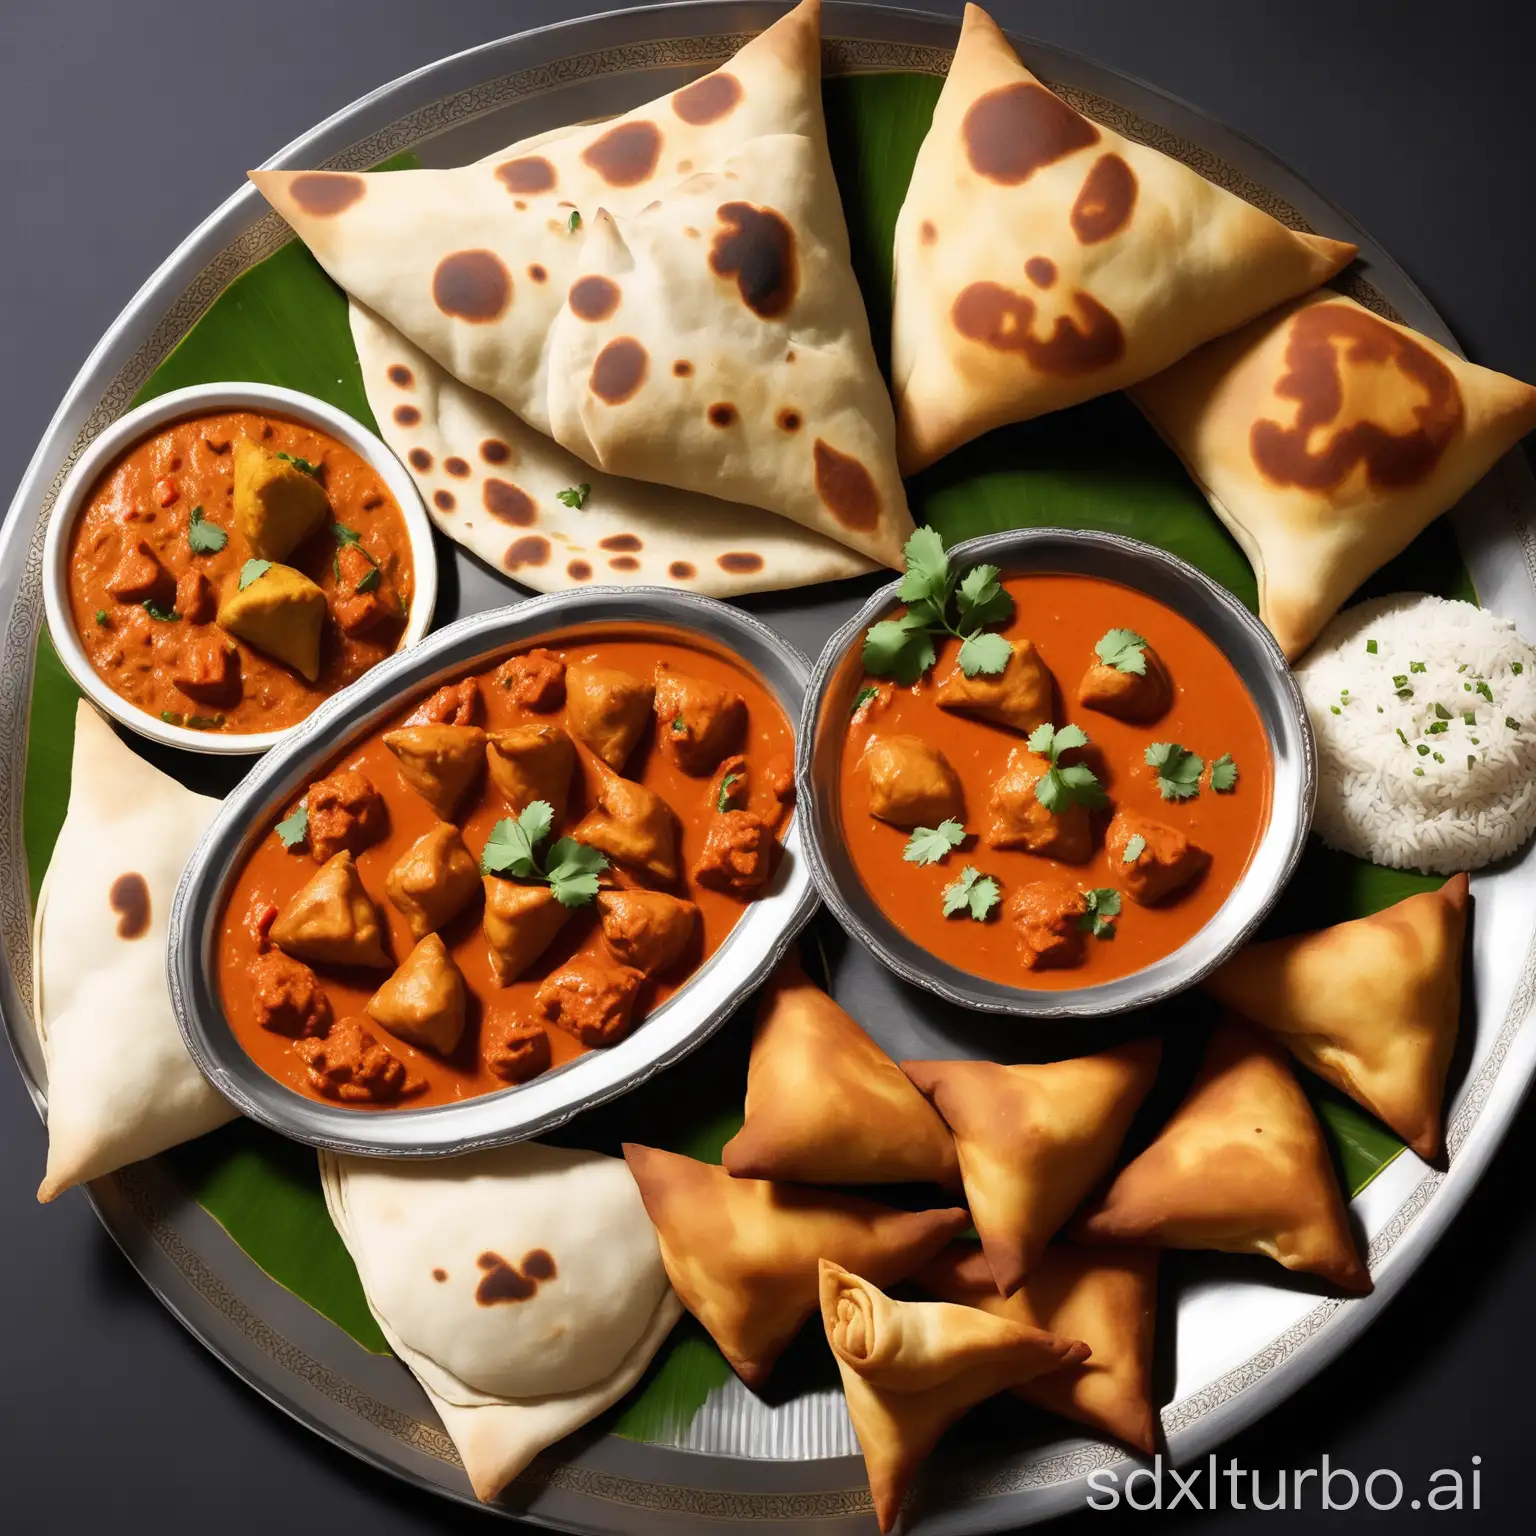 A plate of different traditional Indian dishes, such as chicken tikka masala, samosas, and naan.